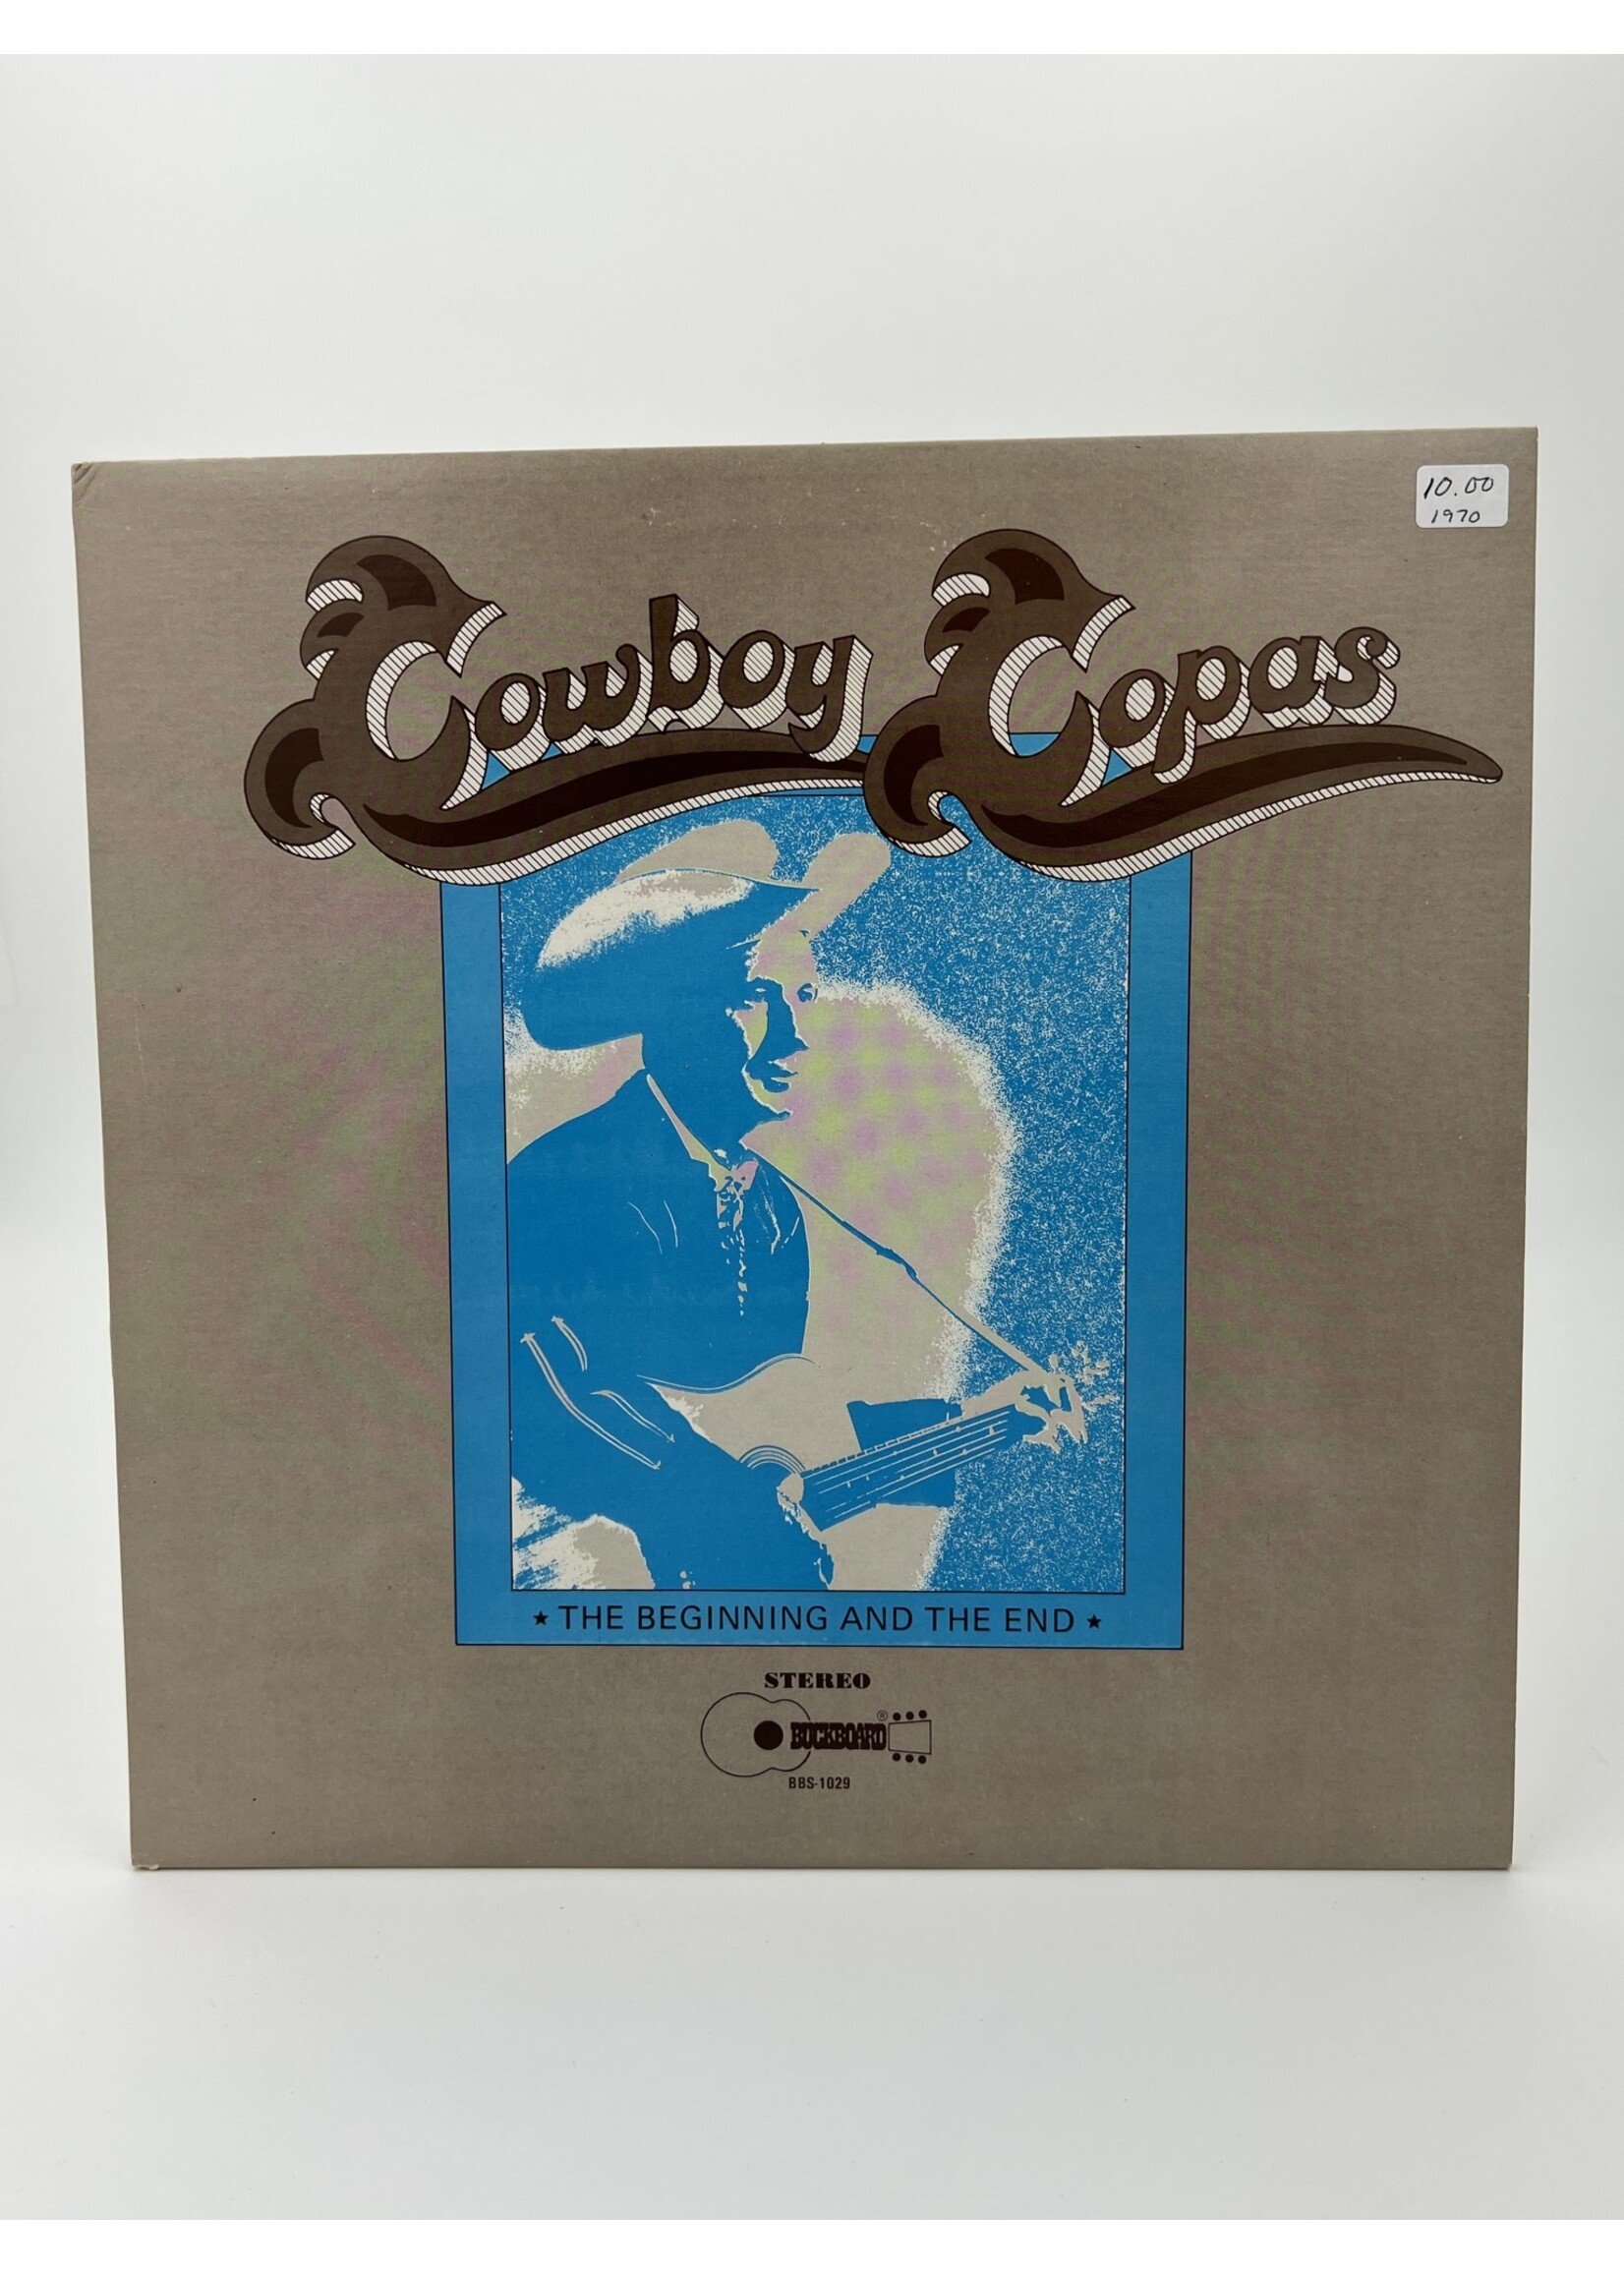 LP   Cowboy Copas The Beginning And The End LP Record